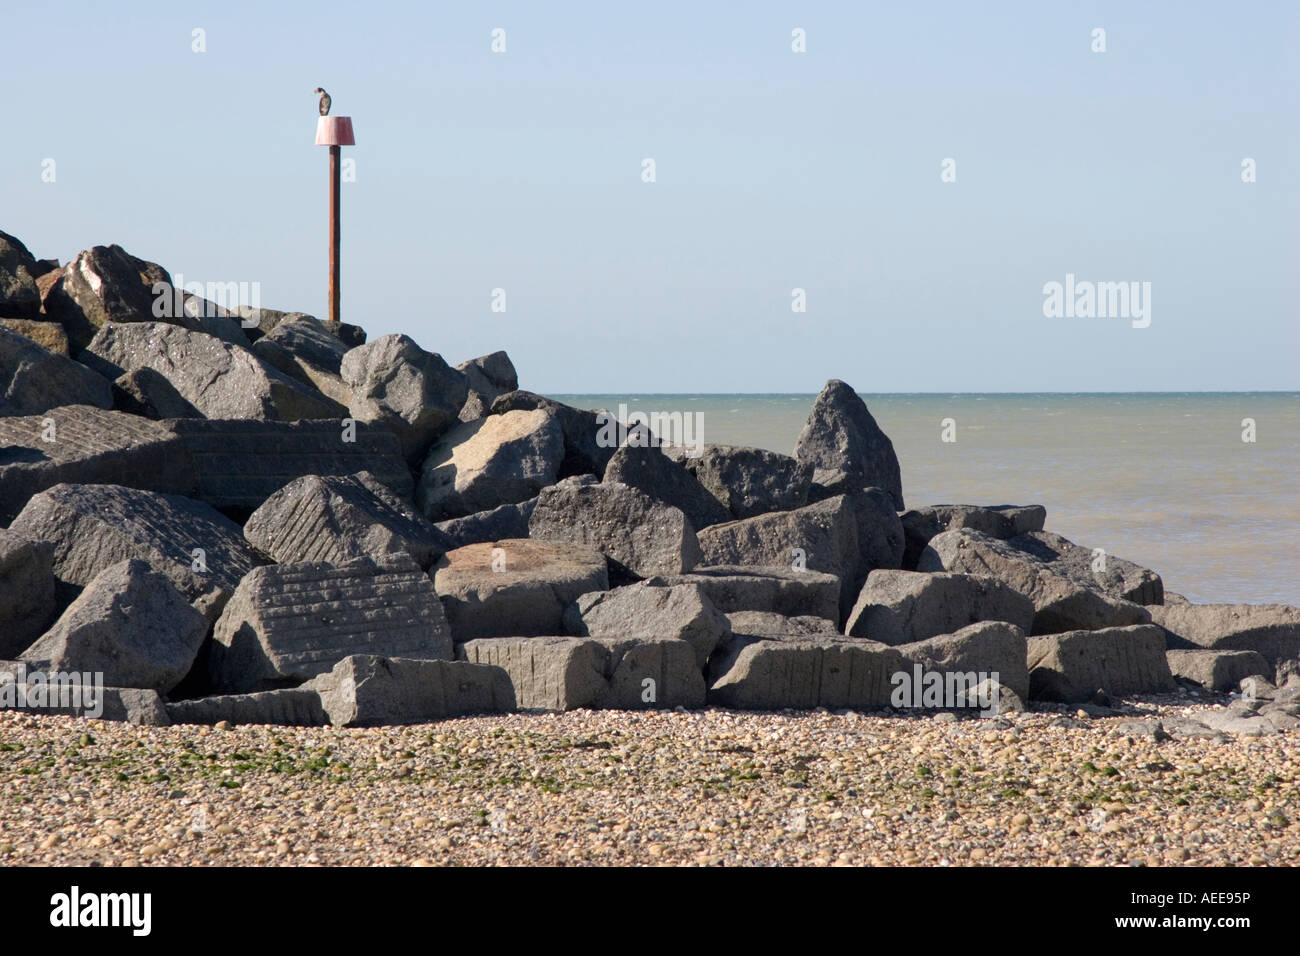 Sea defence scheme consisting of piles of large rocks and boulders Stock Photo